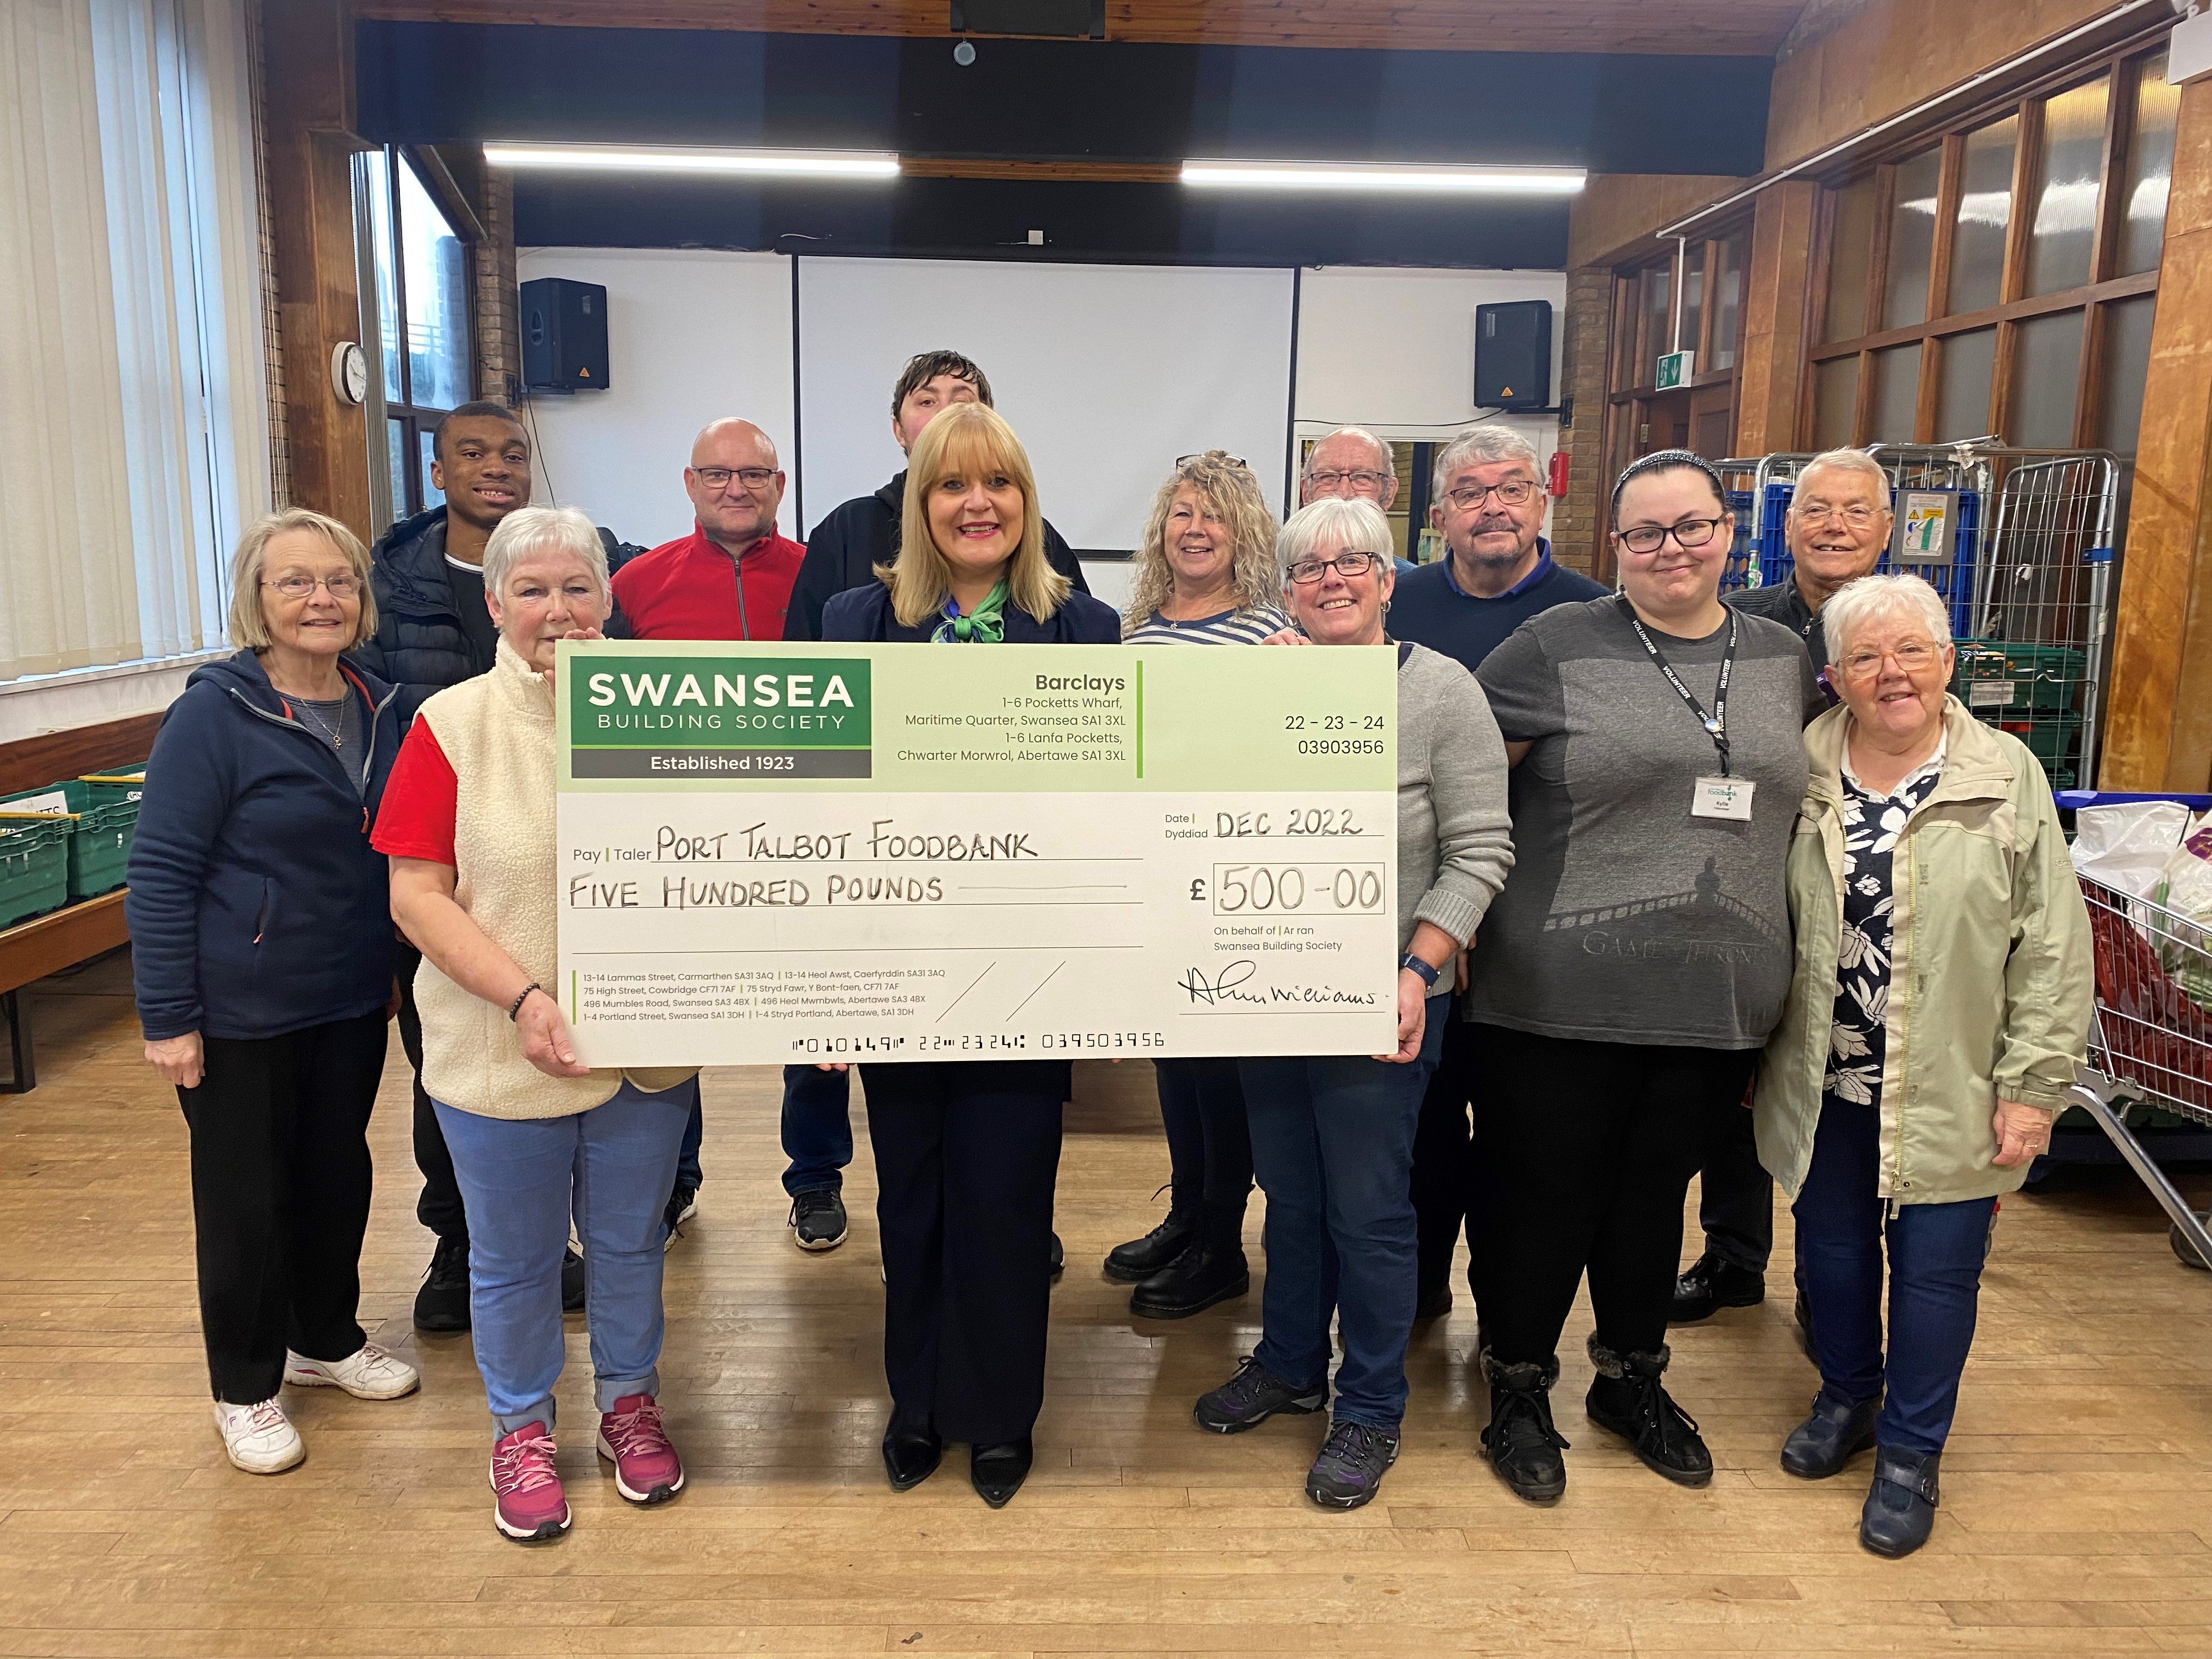 Our Society donates to ten Welsh food banks